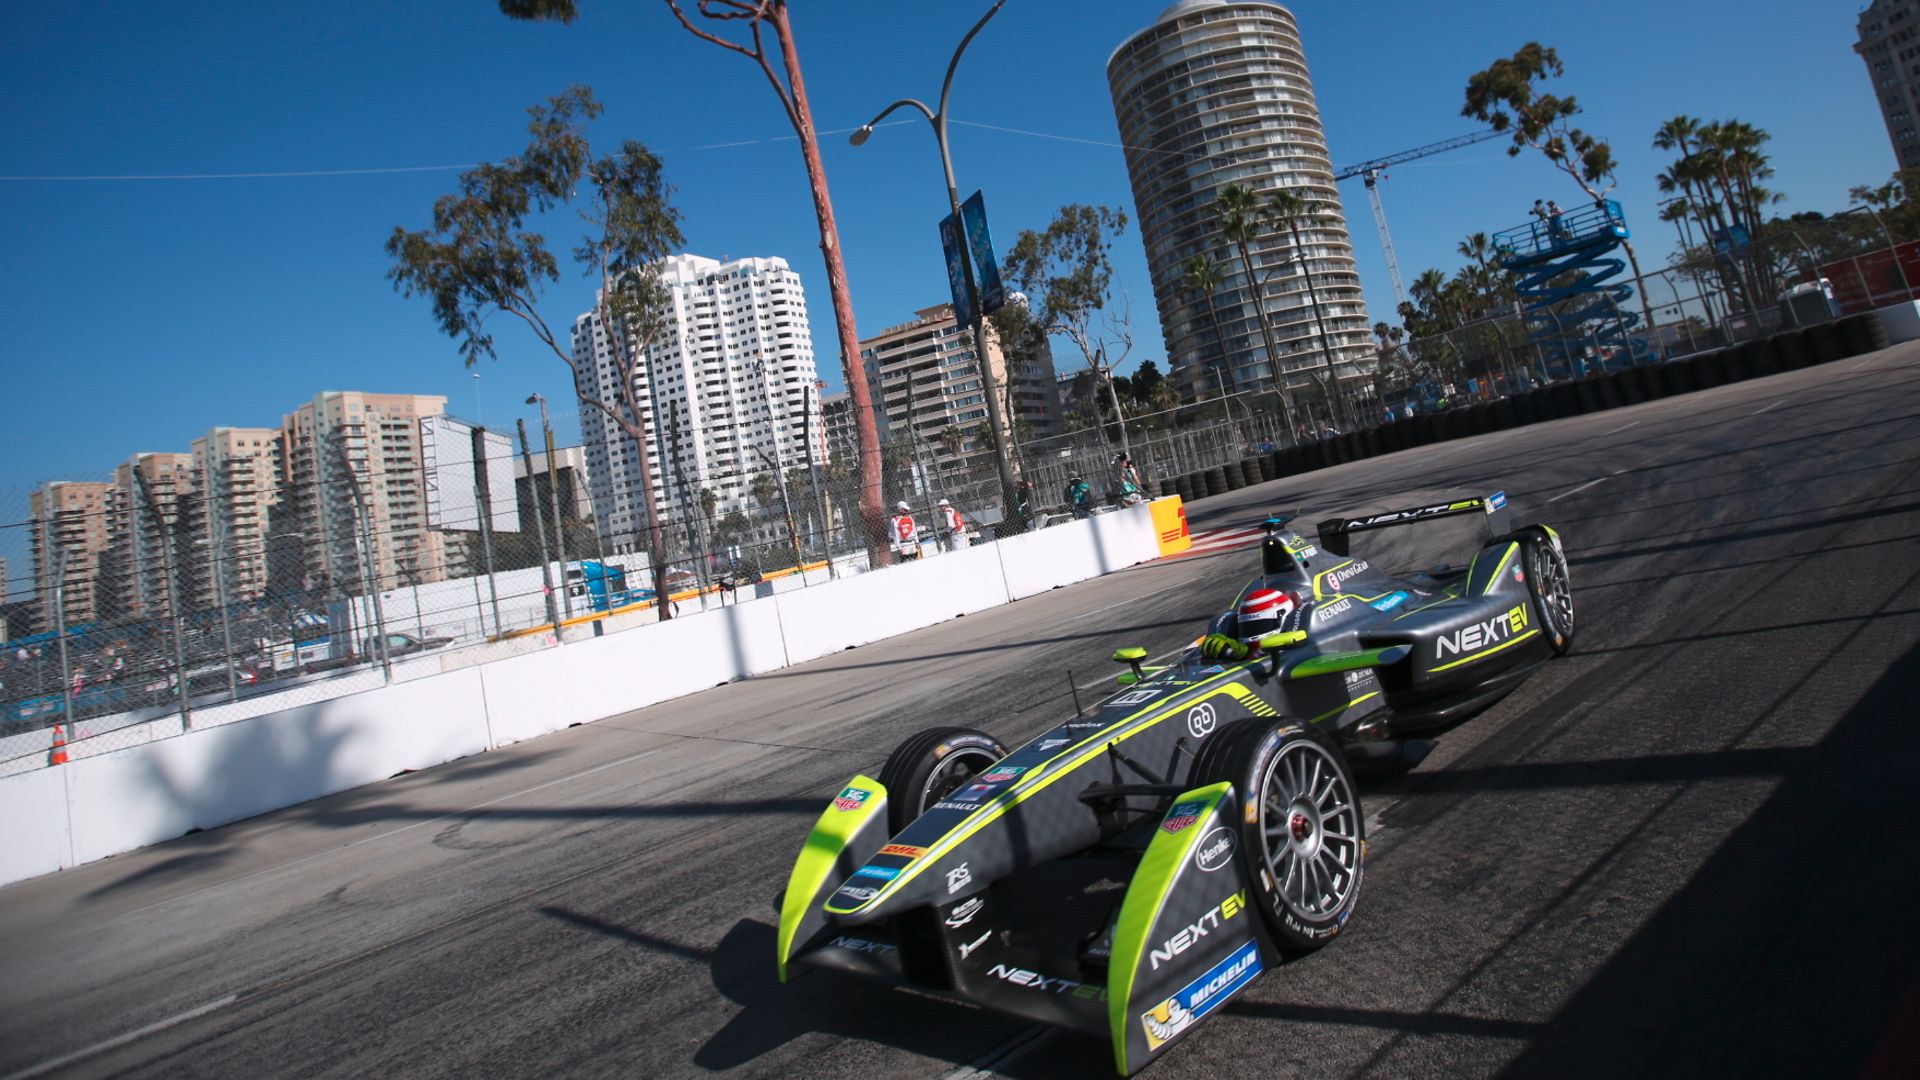 The first championship for formula cars with electric engines